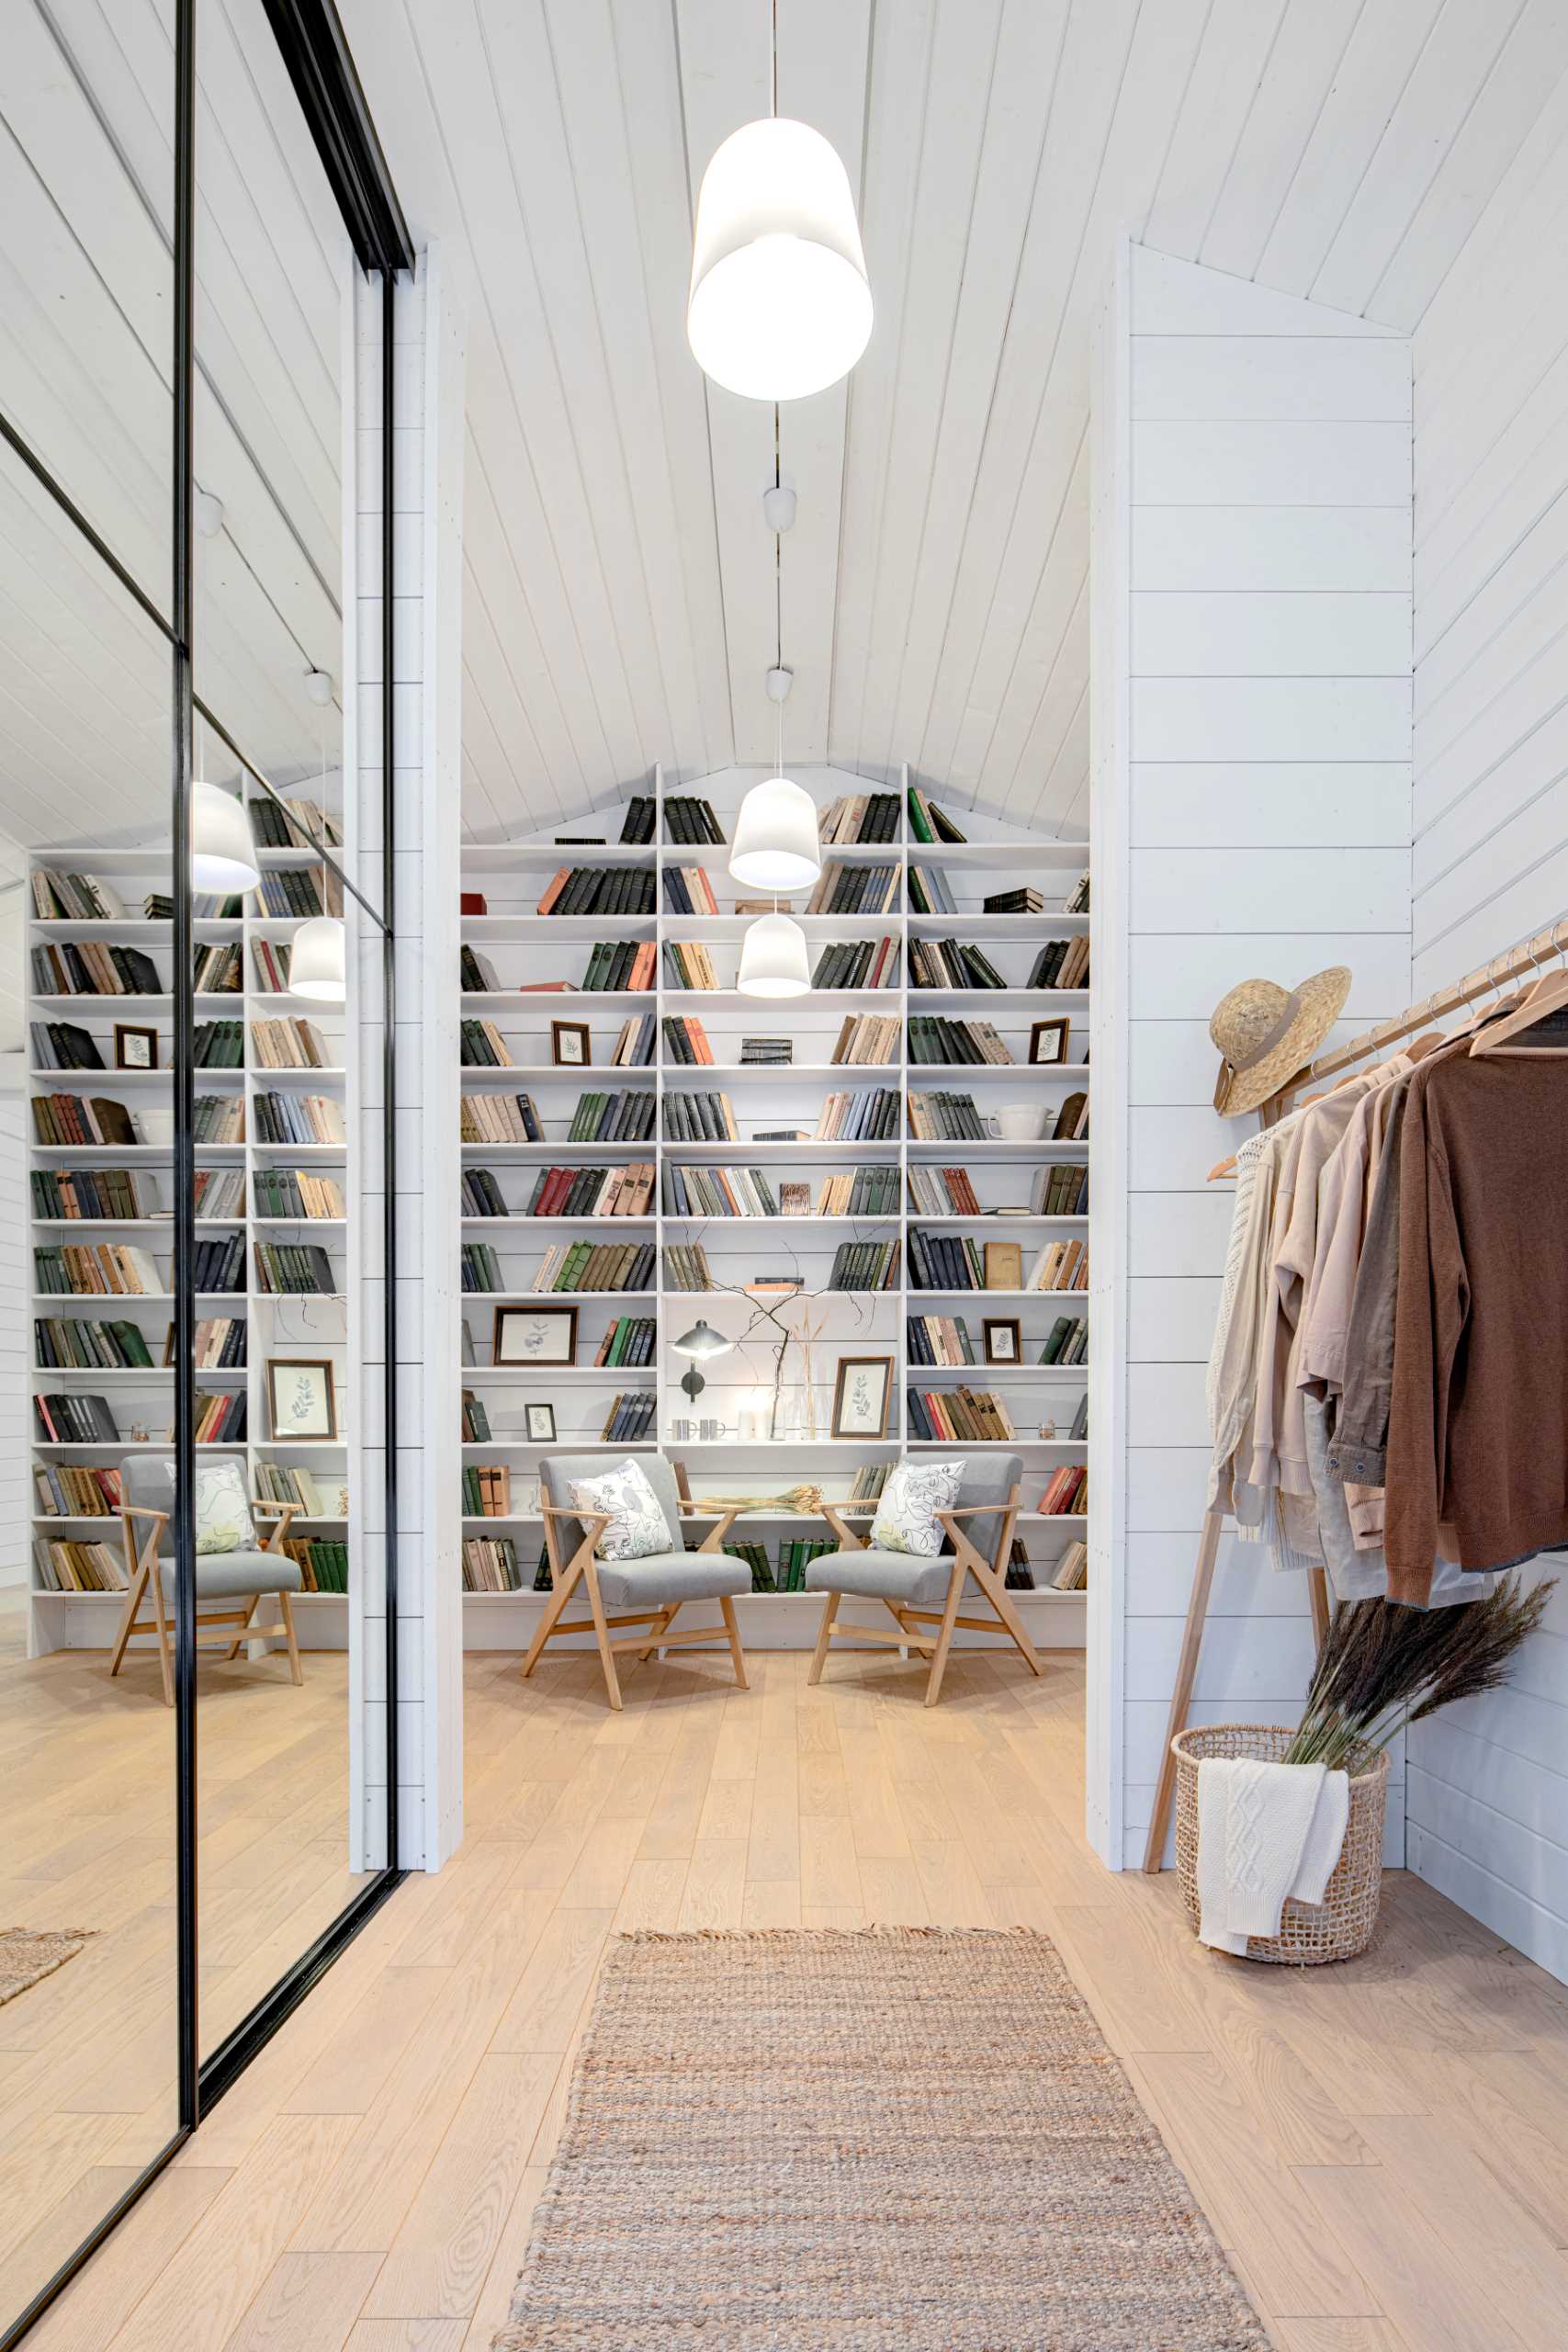 An entryway with a seating area and bookshelf.